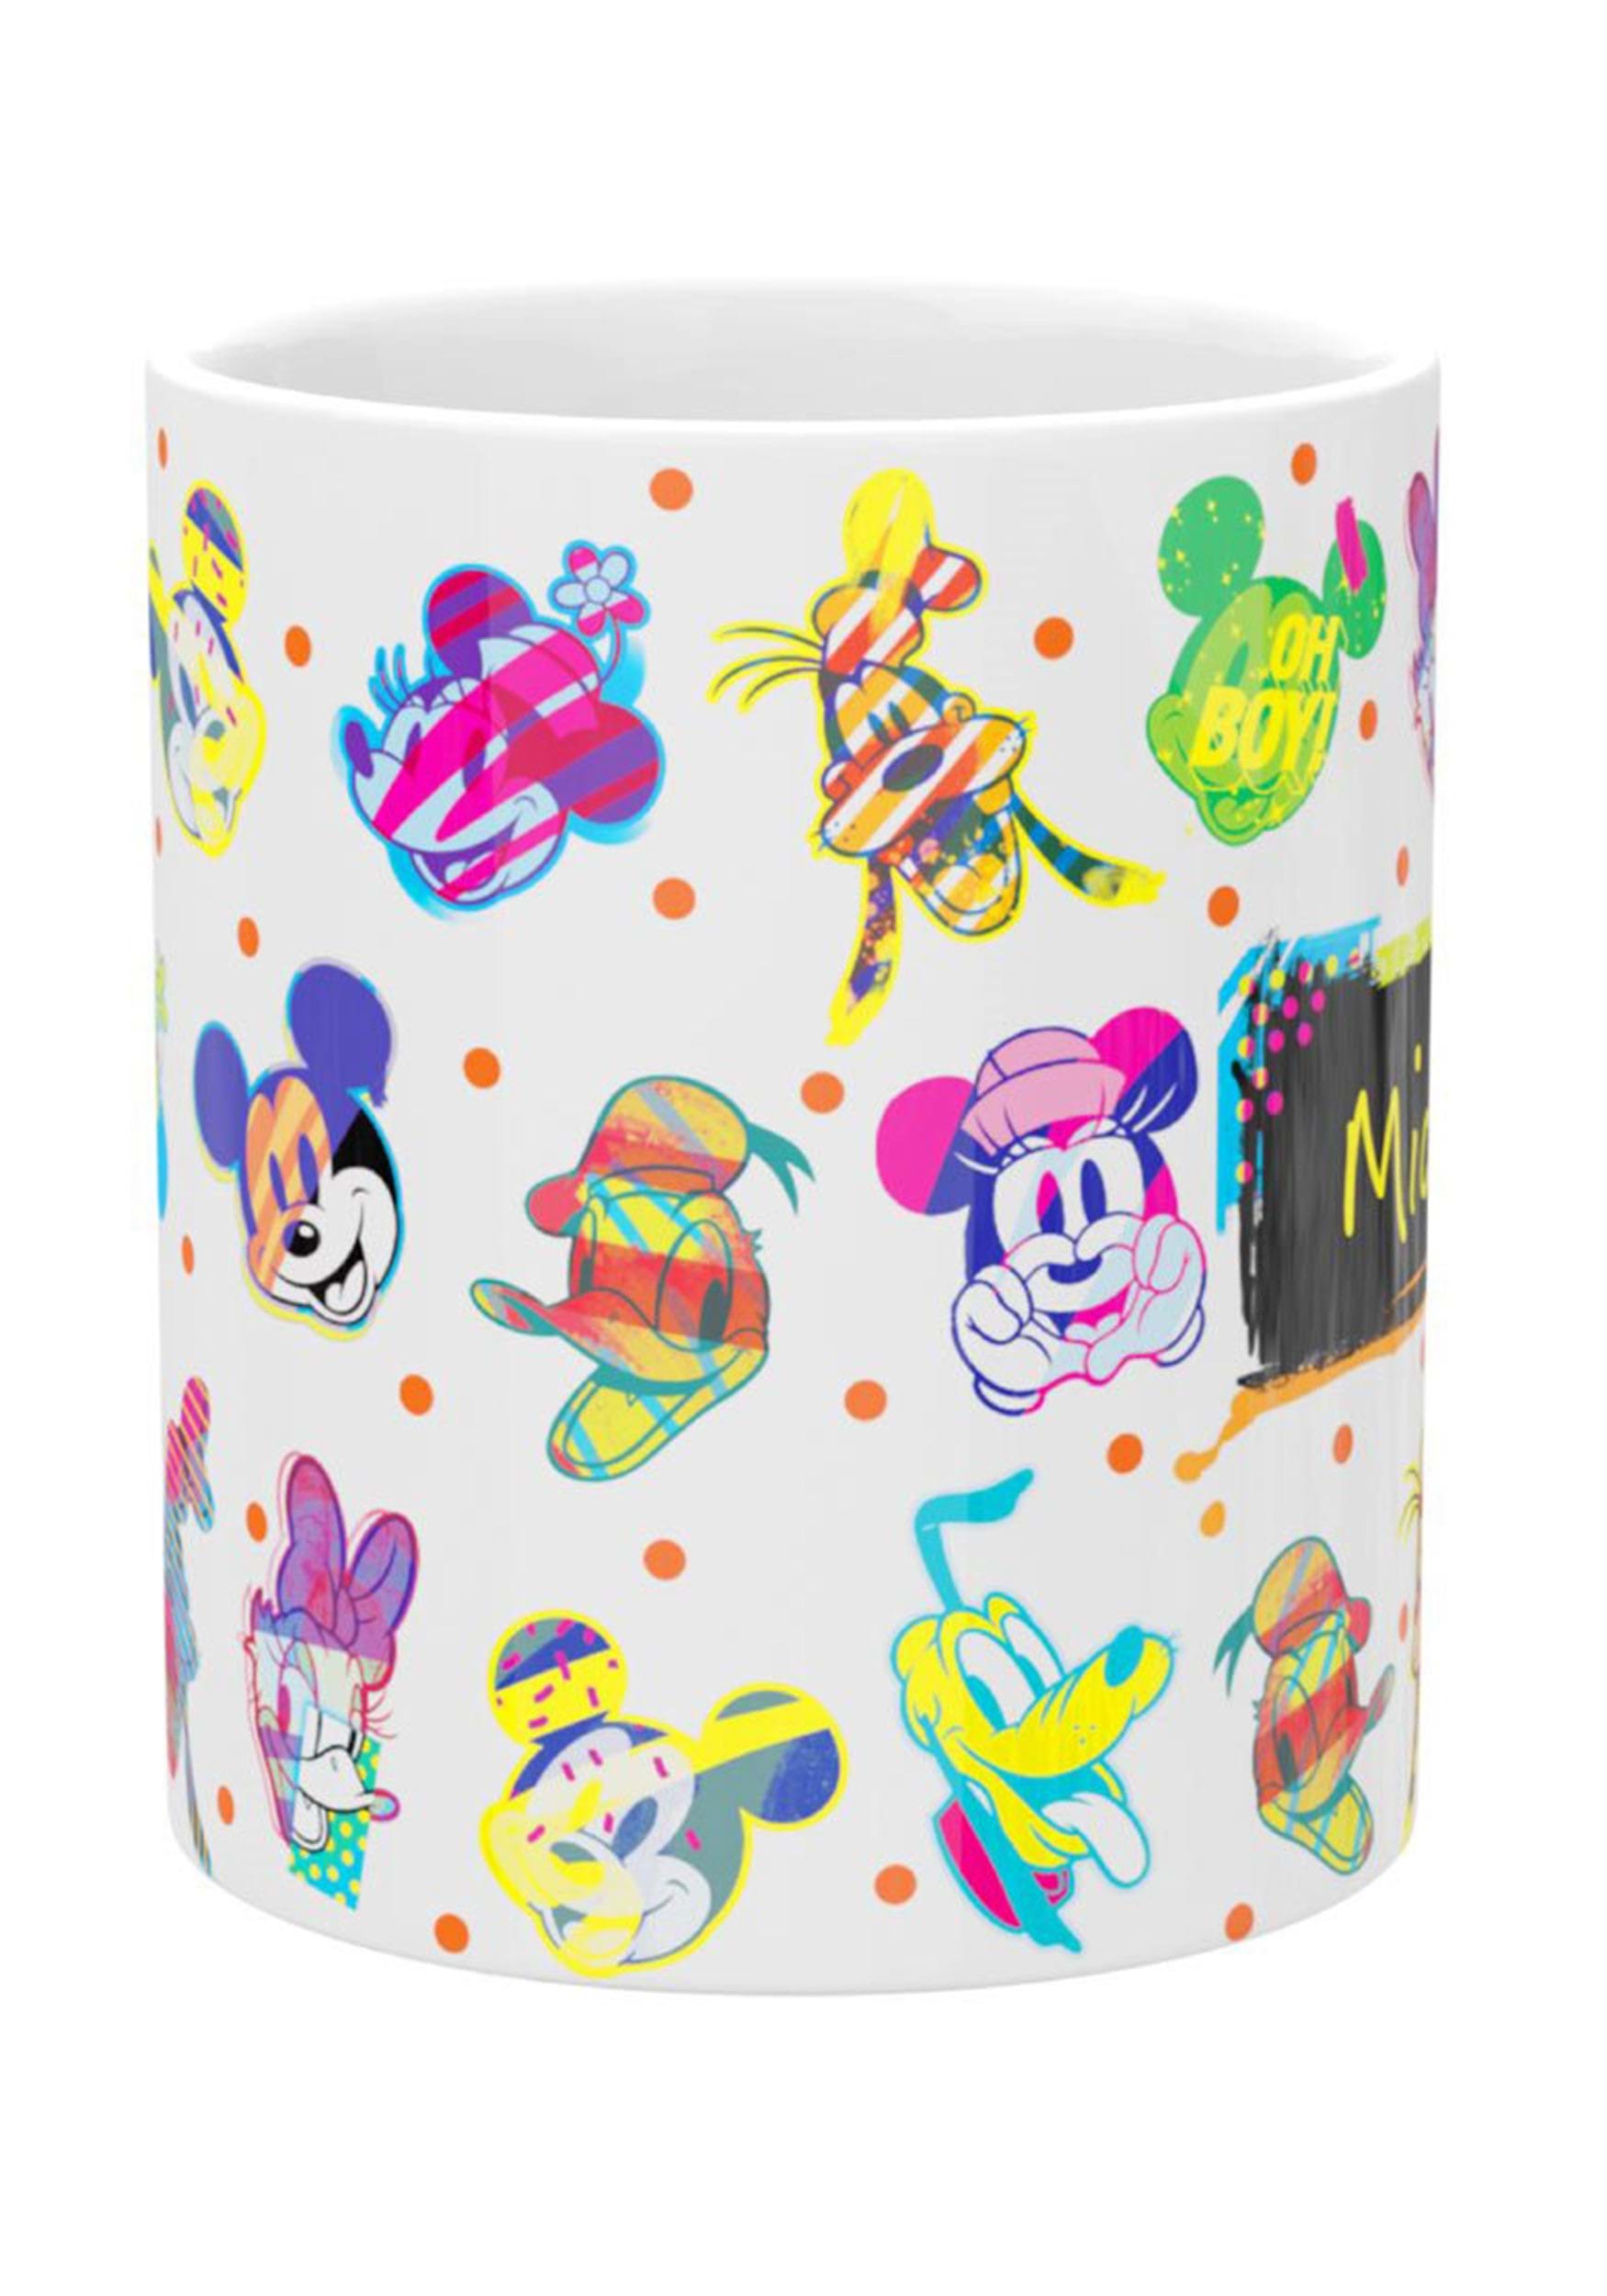 https://images.fun.com/products/80282/2-1-209952/mickey-and-friends-personalized-chalkboard-mug-alt-3.jpg